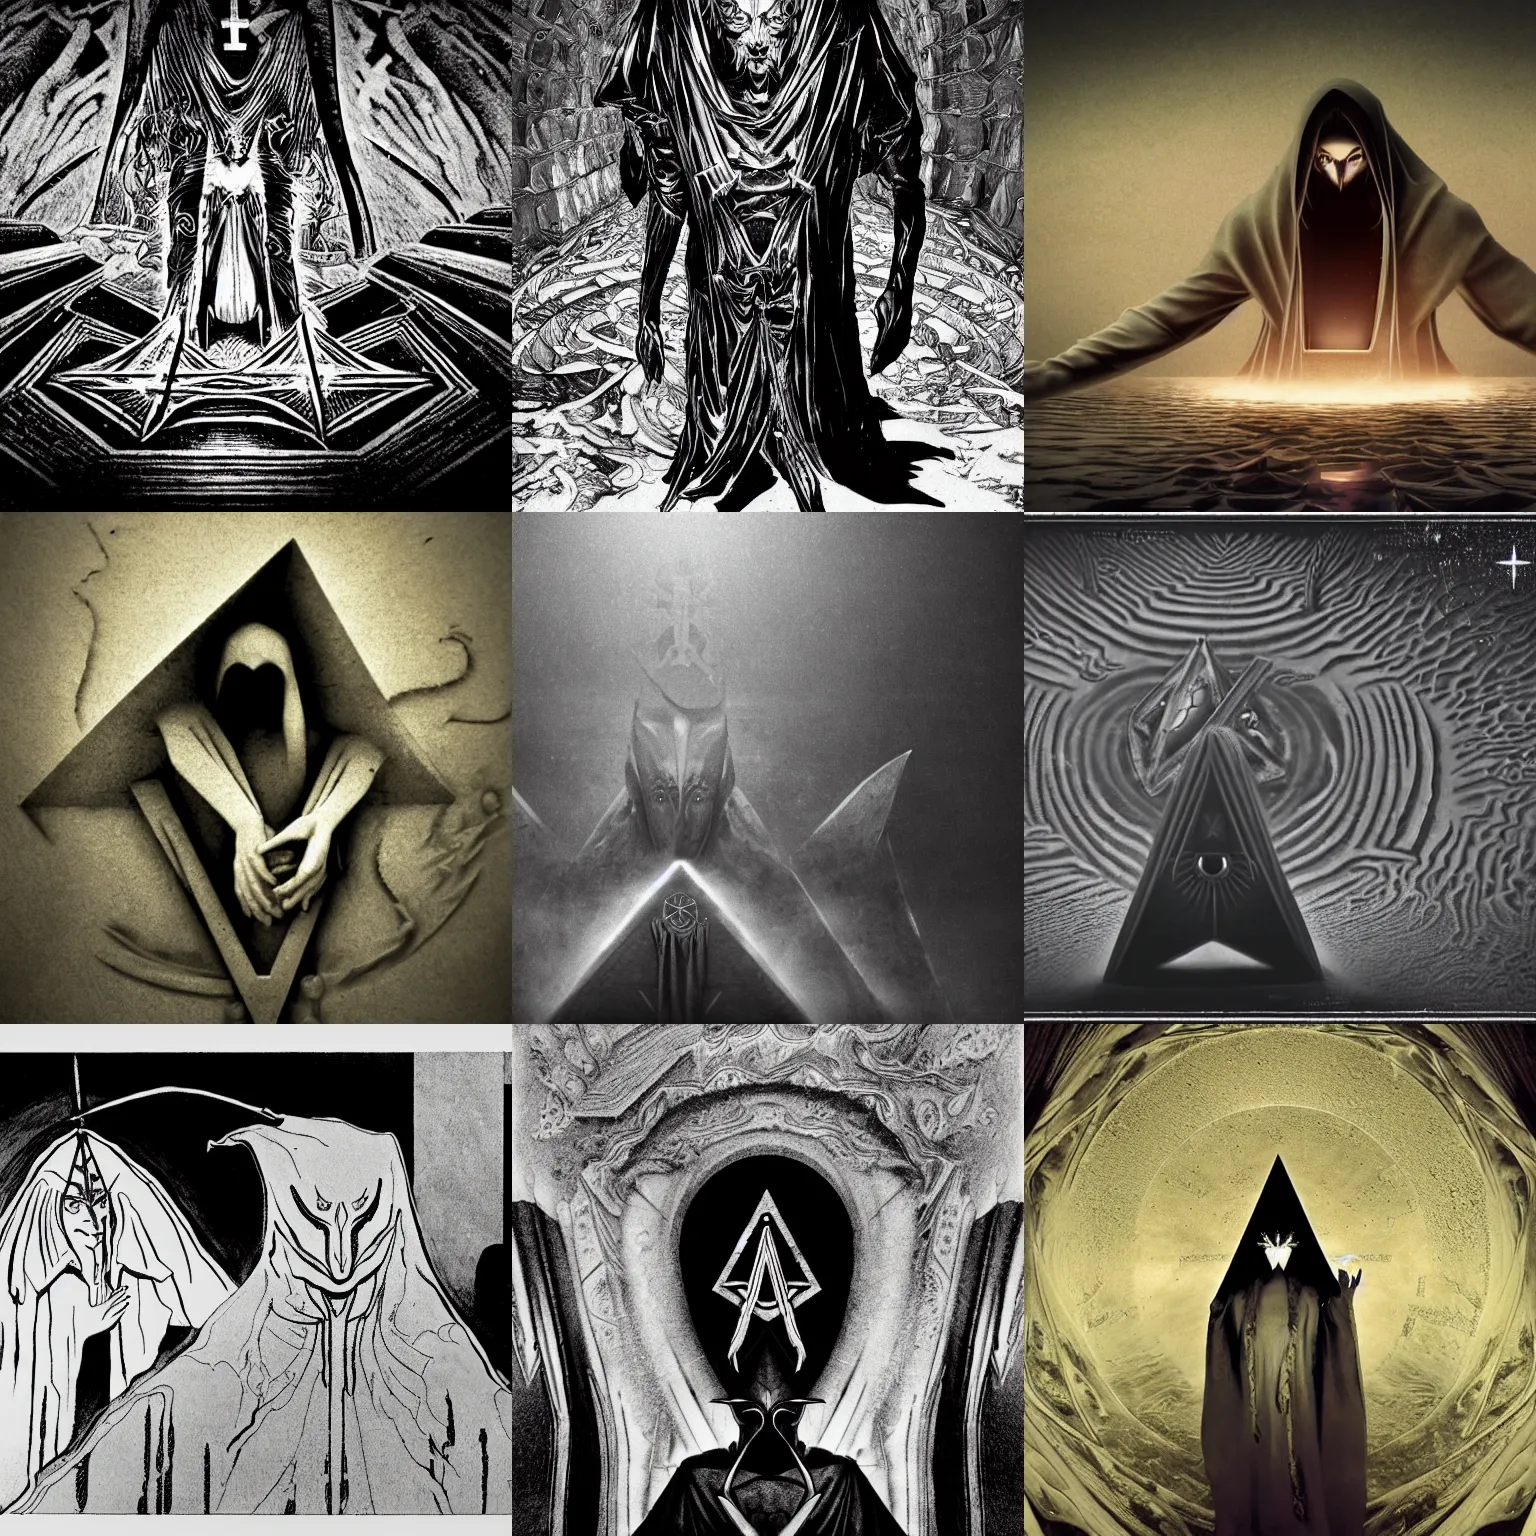 Prompt: Demonic masonic style occult hyperrealism cinematic dark magus style seinen manga film still inspired by occult alchemy(1920), submerged temple ritual scene, extreme closeup portrait of hooded cult master consuming regalia for infinite disciples, half submerged in heavy sand, tilt shift zaha hadid designed babylonian temple background, Panavision X III , 8K, 35mm lens, three point perspective, chiaroscuro, highly detailed, golden ratio, by Allister Crowley, by moma, by Nabbteeri by Sergey Piskunov